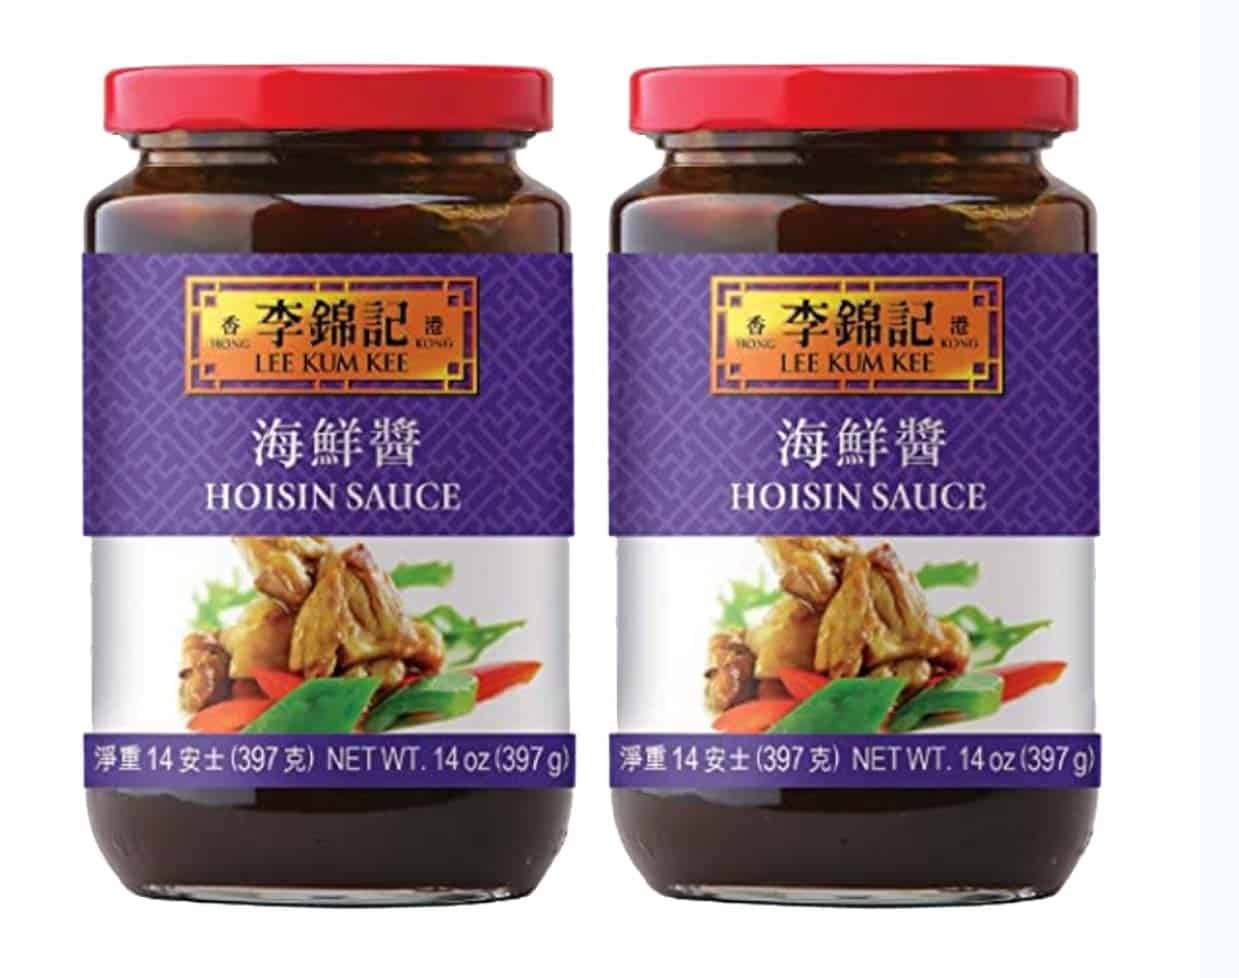 Hoisin sauce is made from a variety of ingredients, including fermented soybeans, sugar, vinegar, and spices. It is thick and sweet, with a slightly spicy kick.